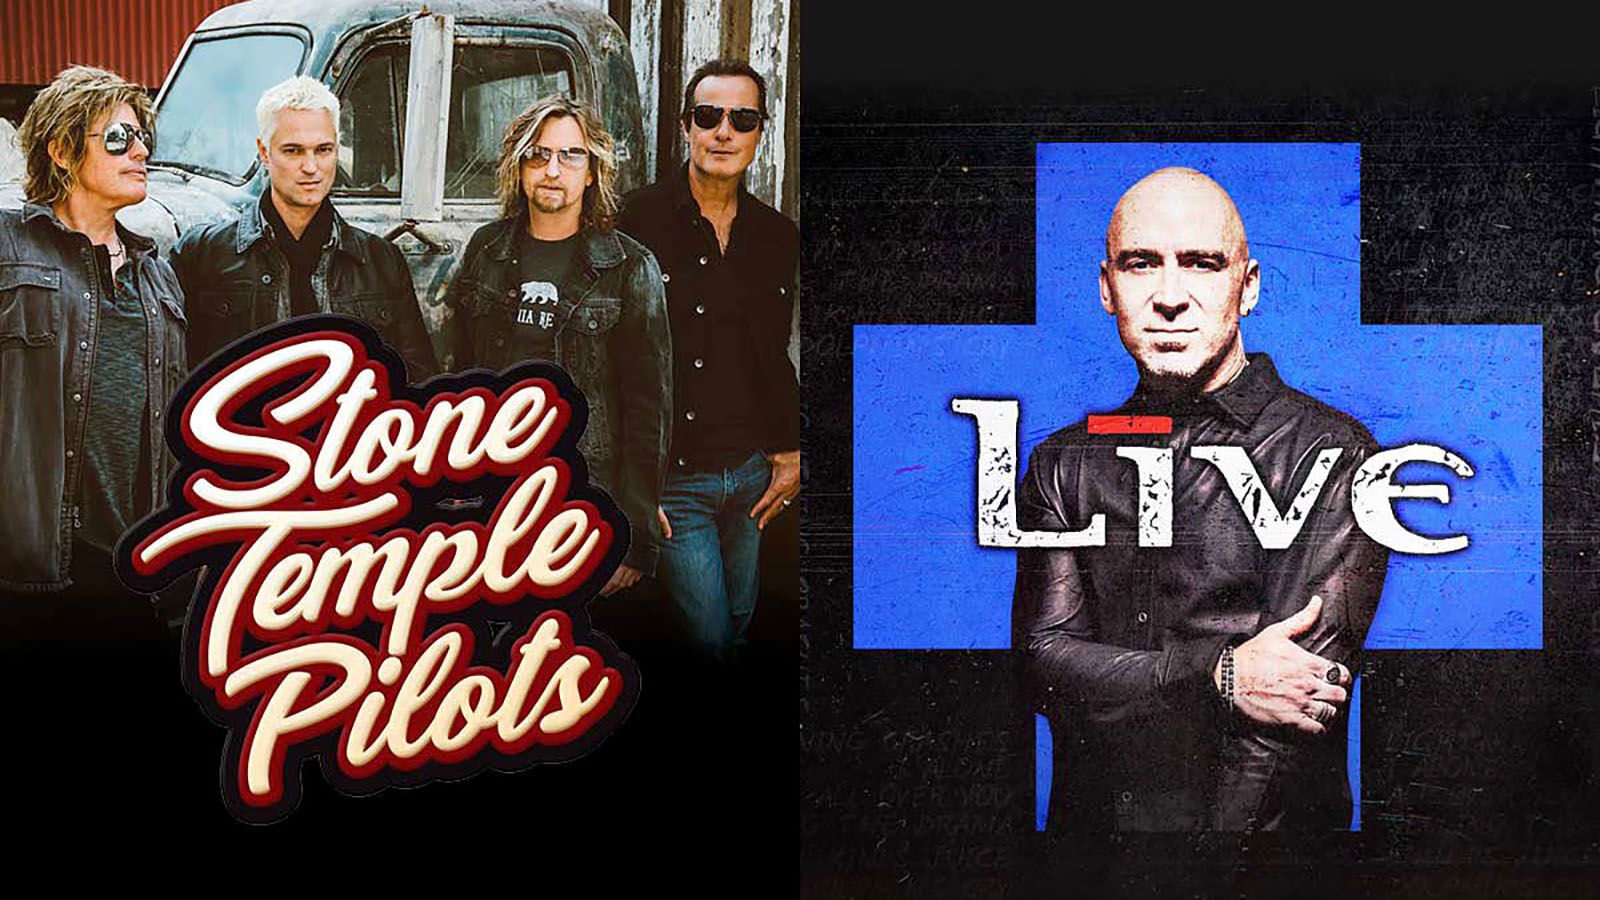 Stone Temple Pilots and Live and teaming up for a summer tour.